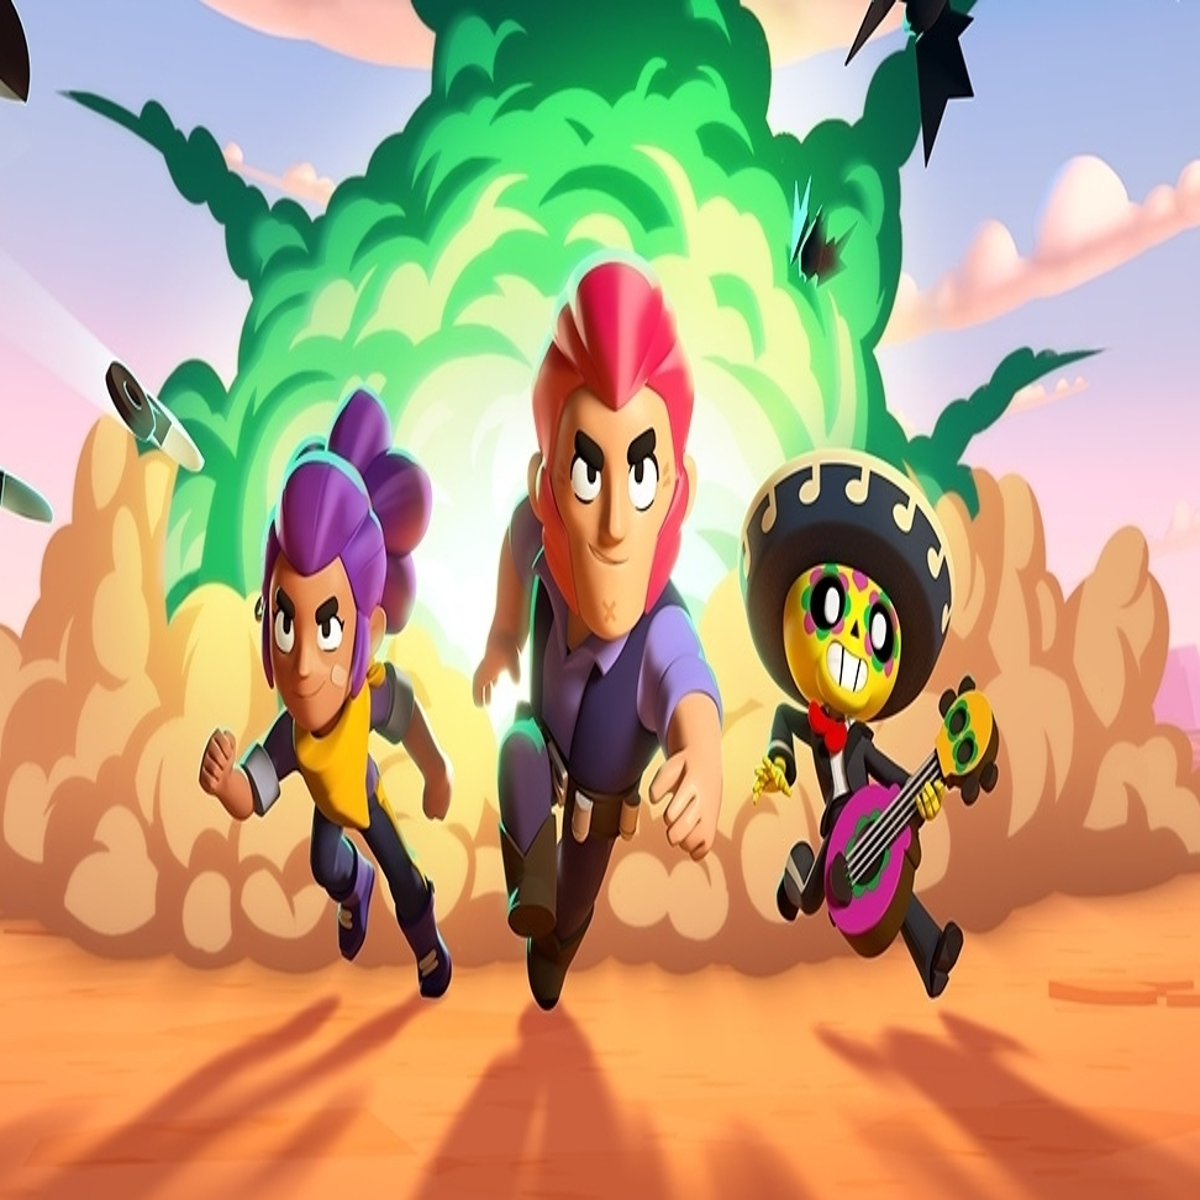 How to Win 'Brawl Stars' Games: Join Our 'Brawl Stars' Discord